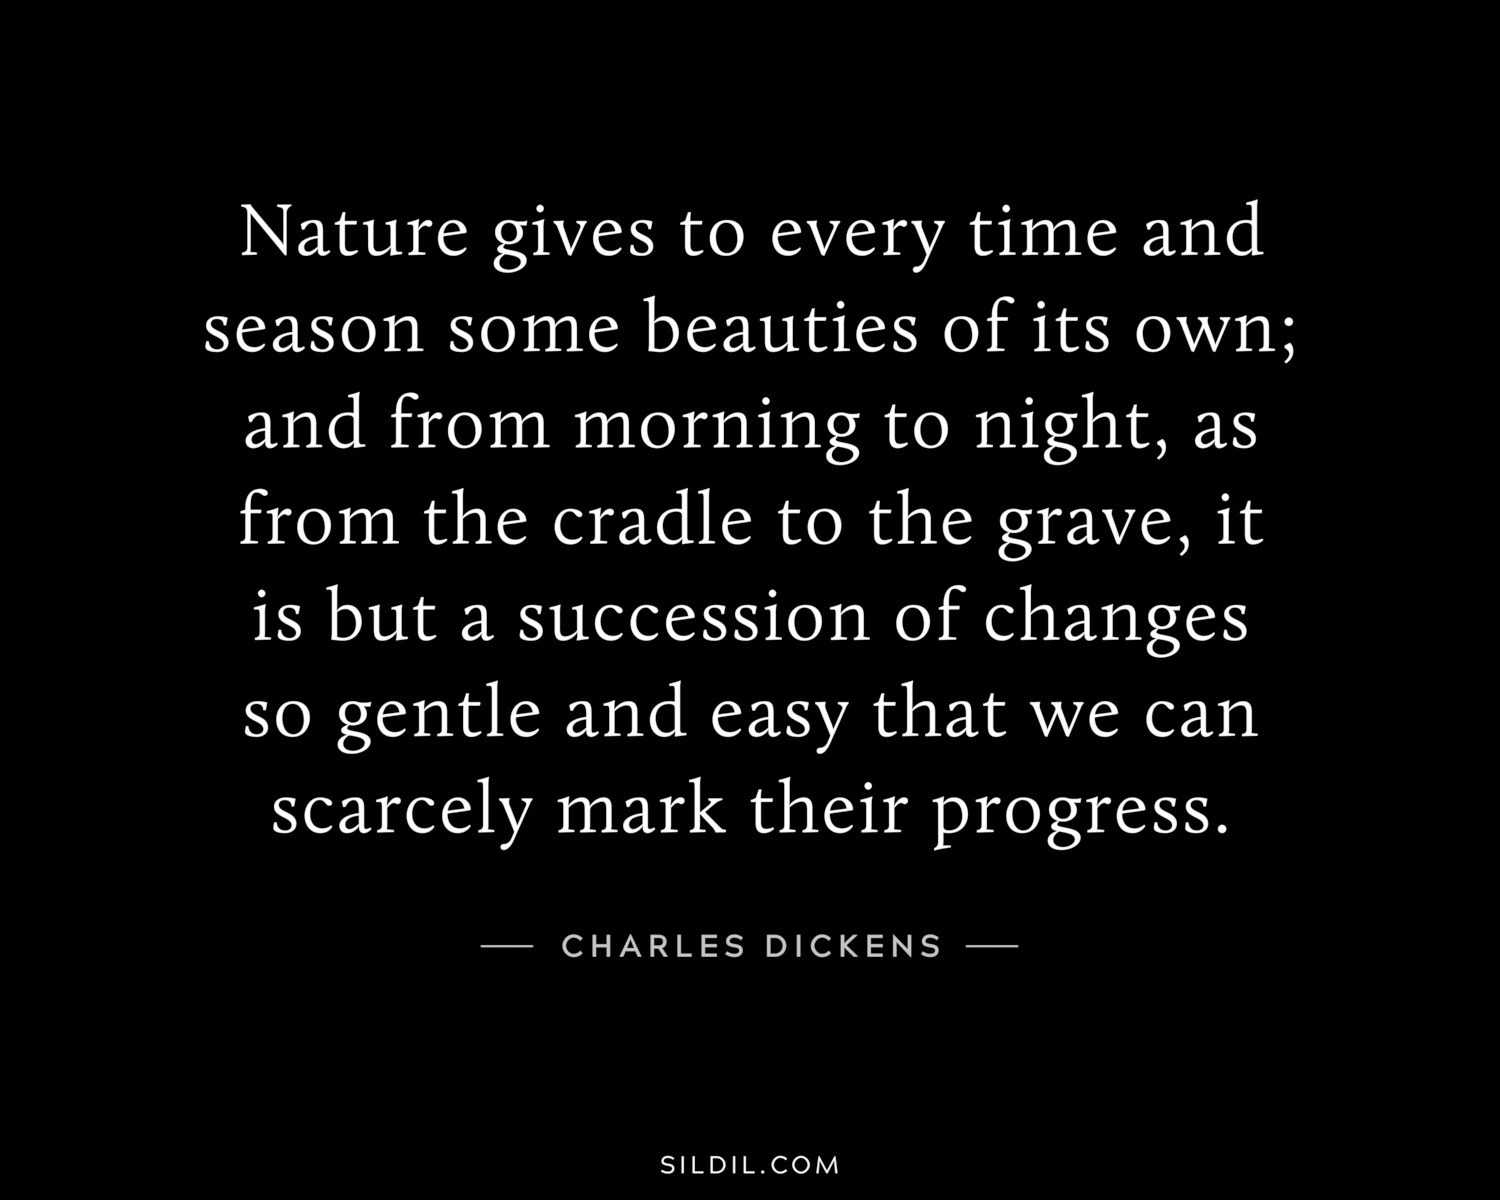 Nature gives to every time and season some beauties of its own; and from morning to night, as from the cradle to the grave, it is but a succession of changes so gentle and easy that we can scarcely mark their progress.